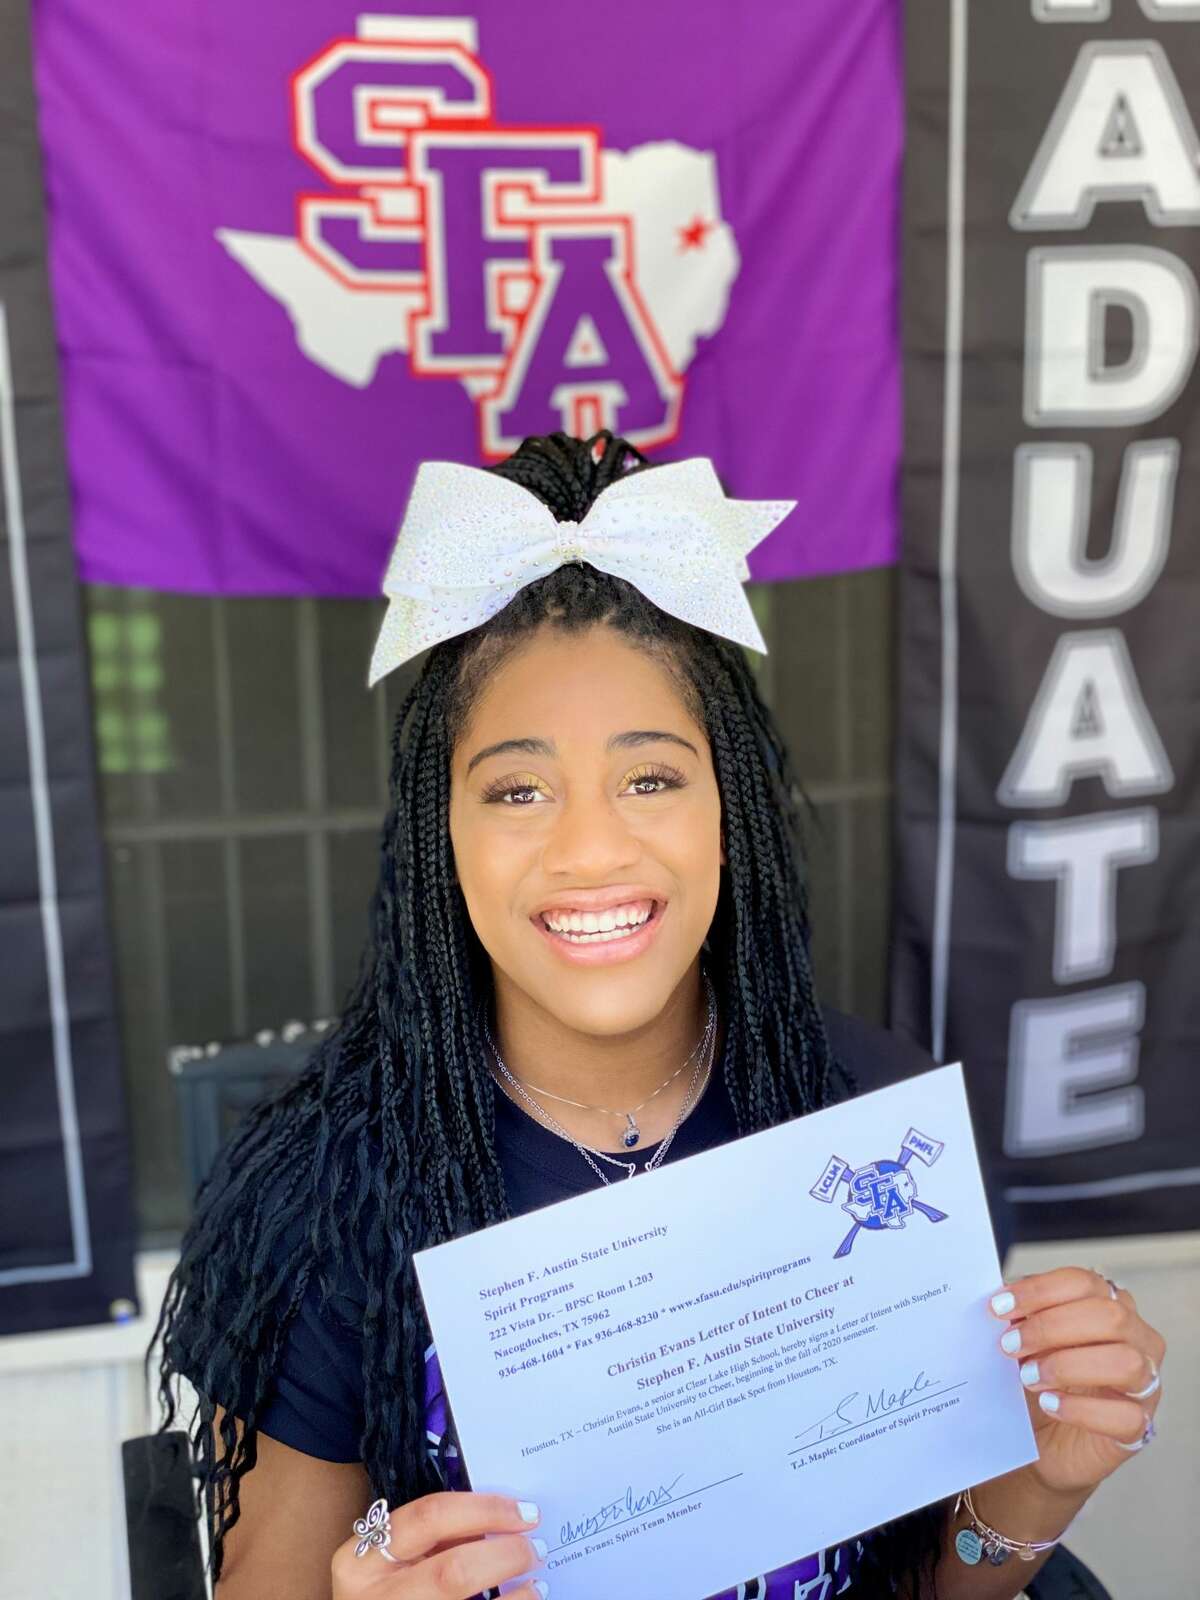 A Black cheerleader at Stephen F. Austin State University says she was awakened by police storming her dorm room on with guns drawn after a group of students made a false report that she had scissors and was threatening to stab people, according to the student's attorney, Randall Kallinen.